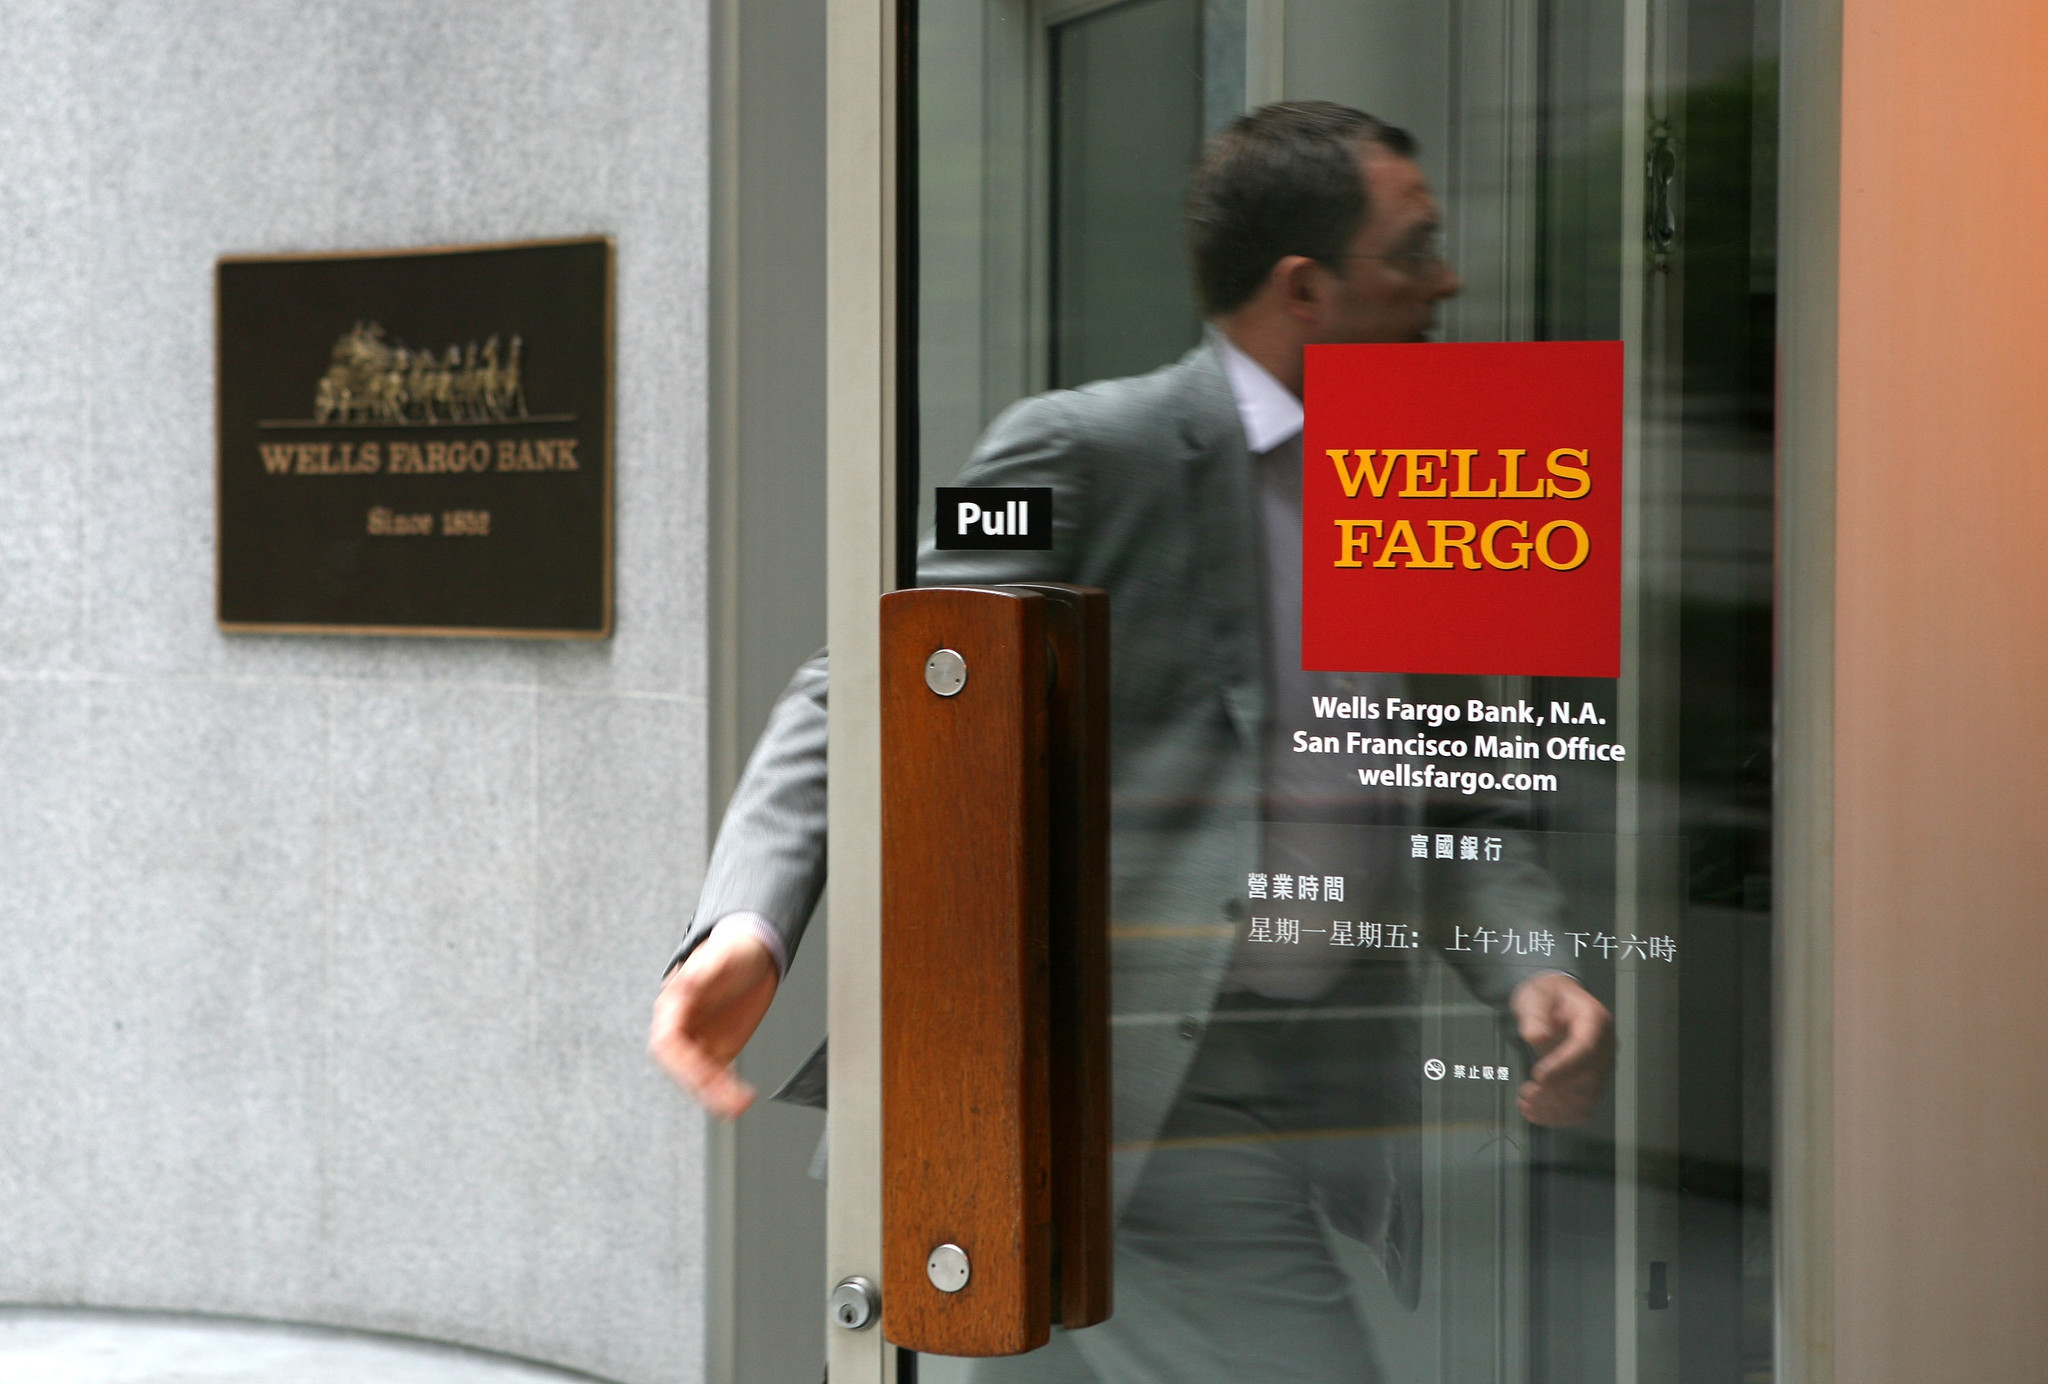 Wells Fargo to pay $110 million to settle fake account suit - Lehigh Valley Business Cycle2048 x 1384